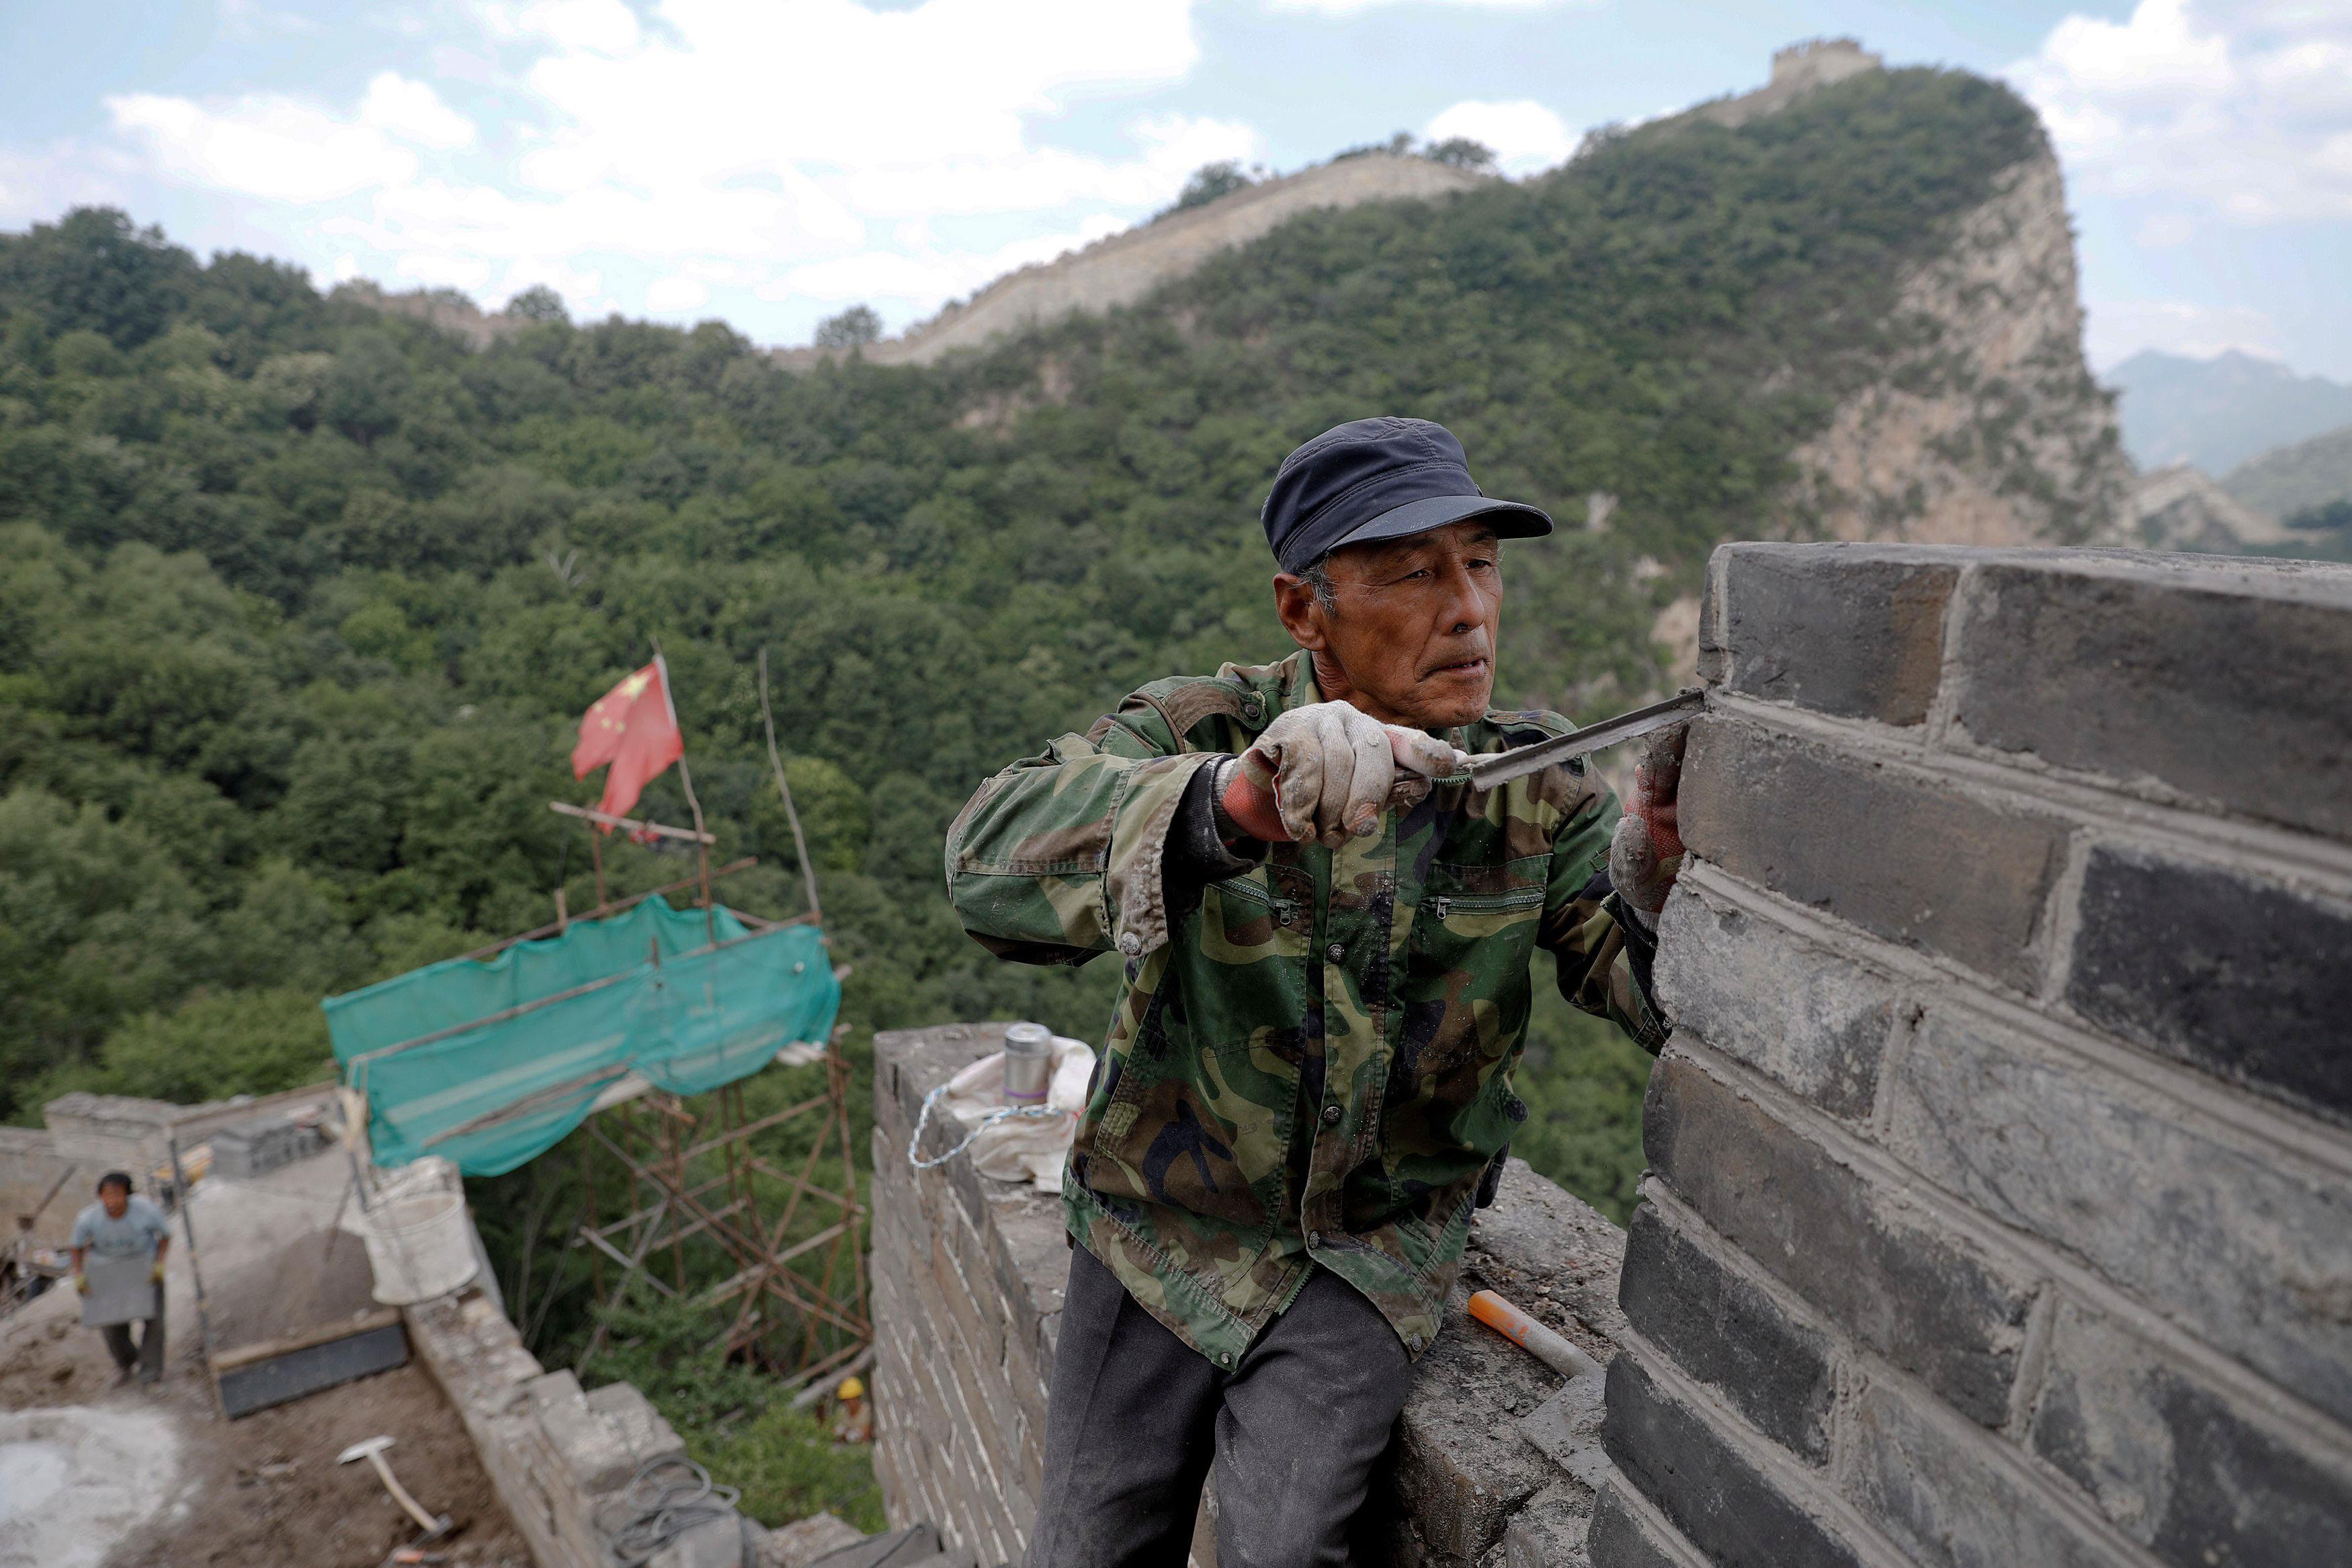 The Wider Image: Rebuilding the Great Wall of China